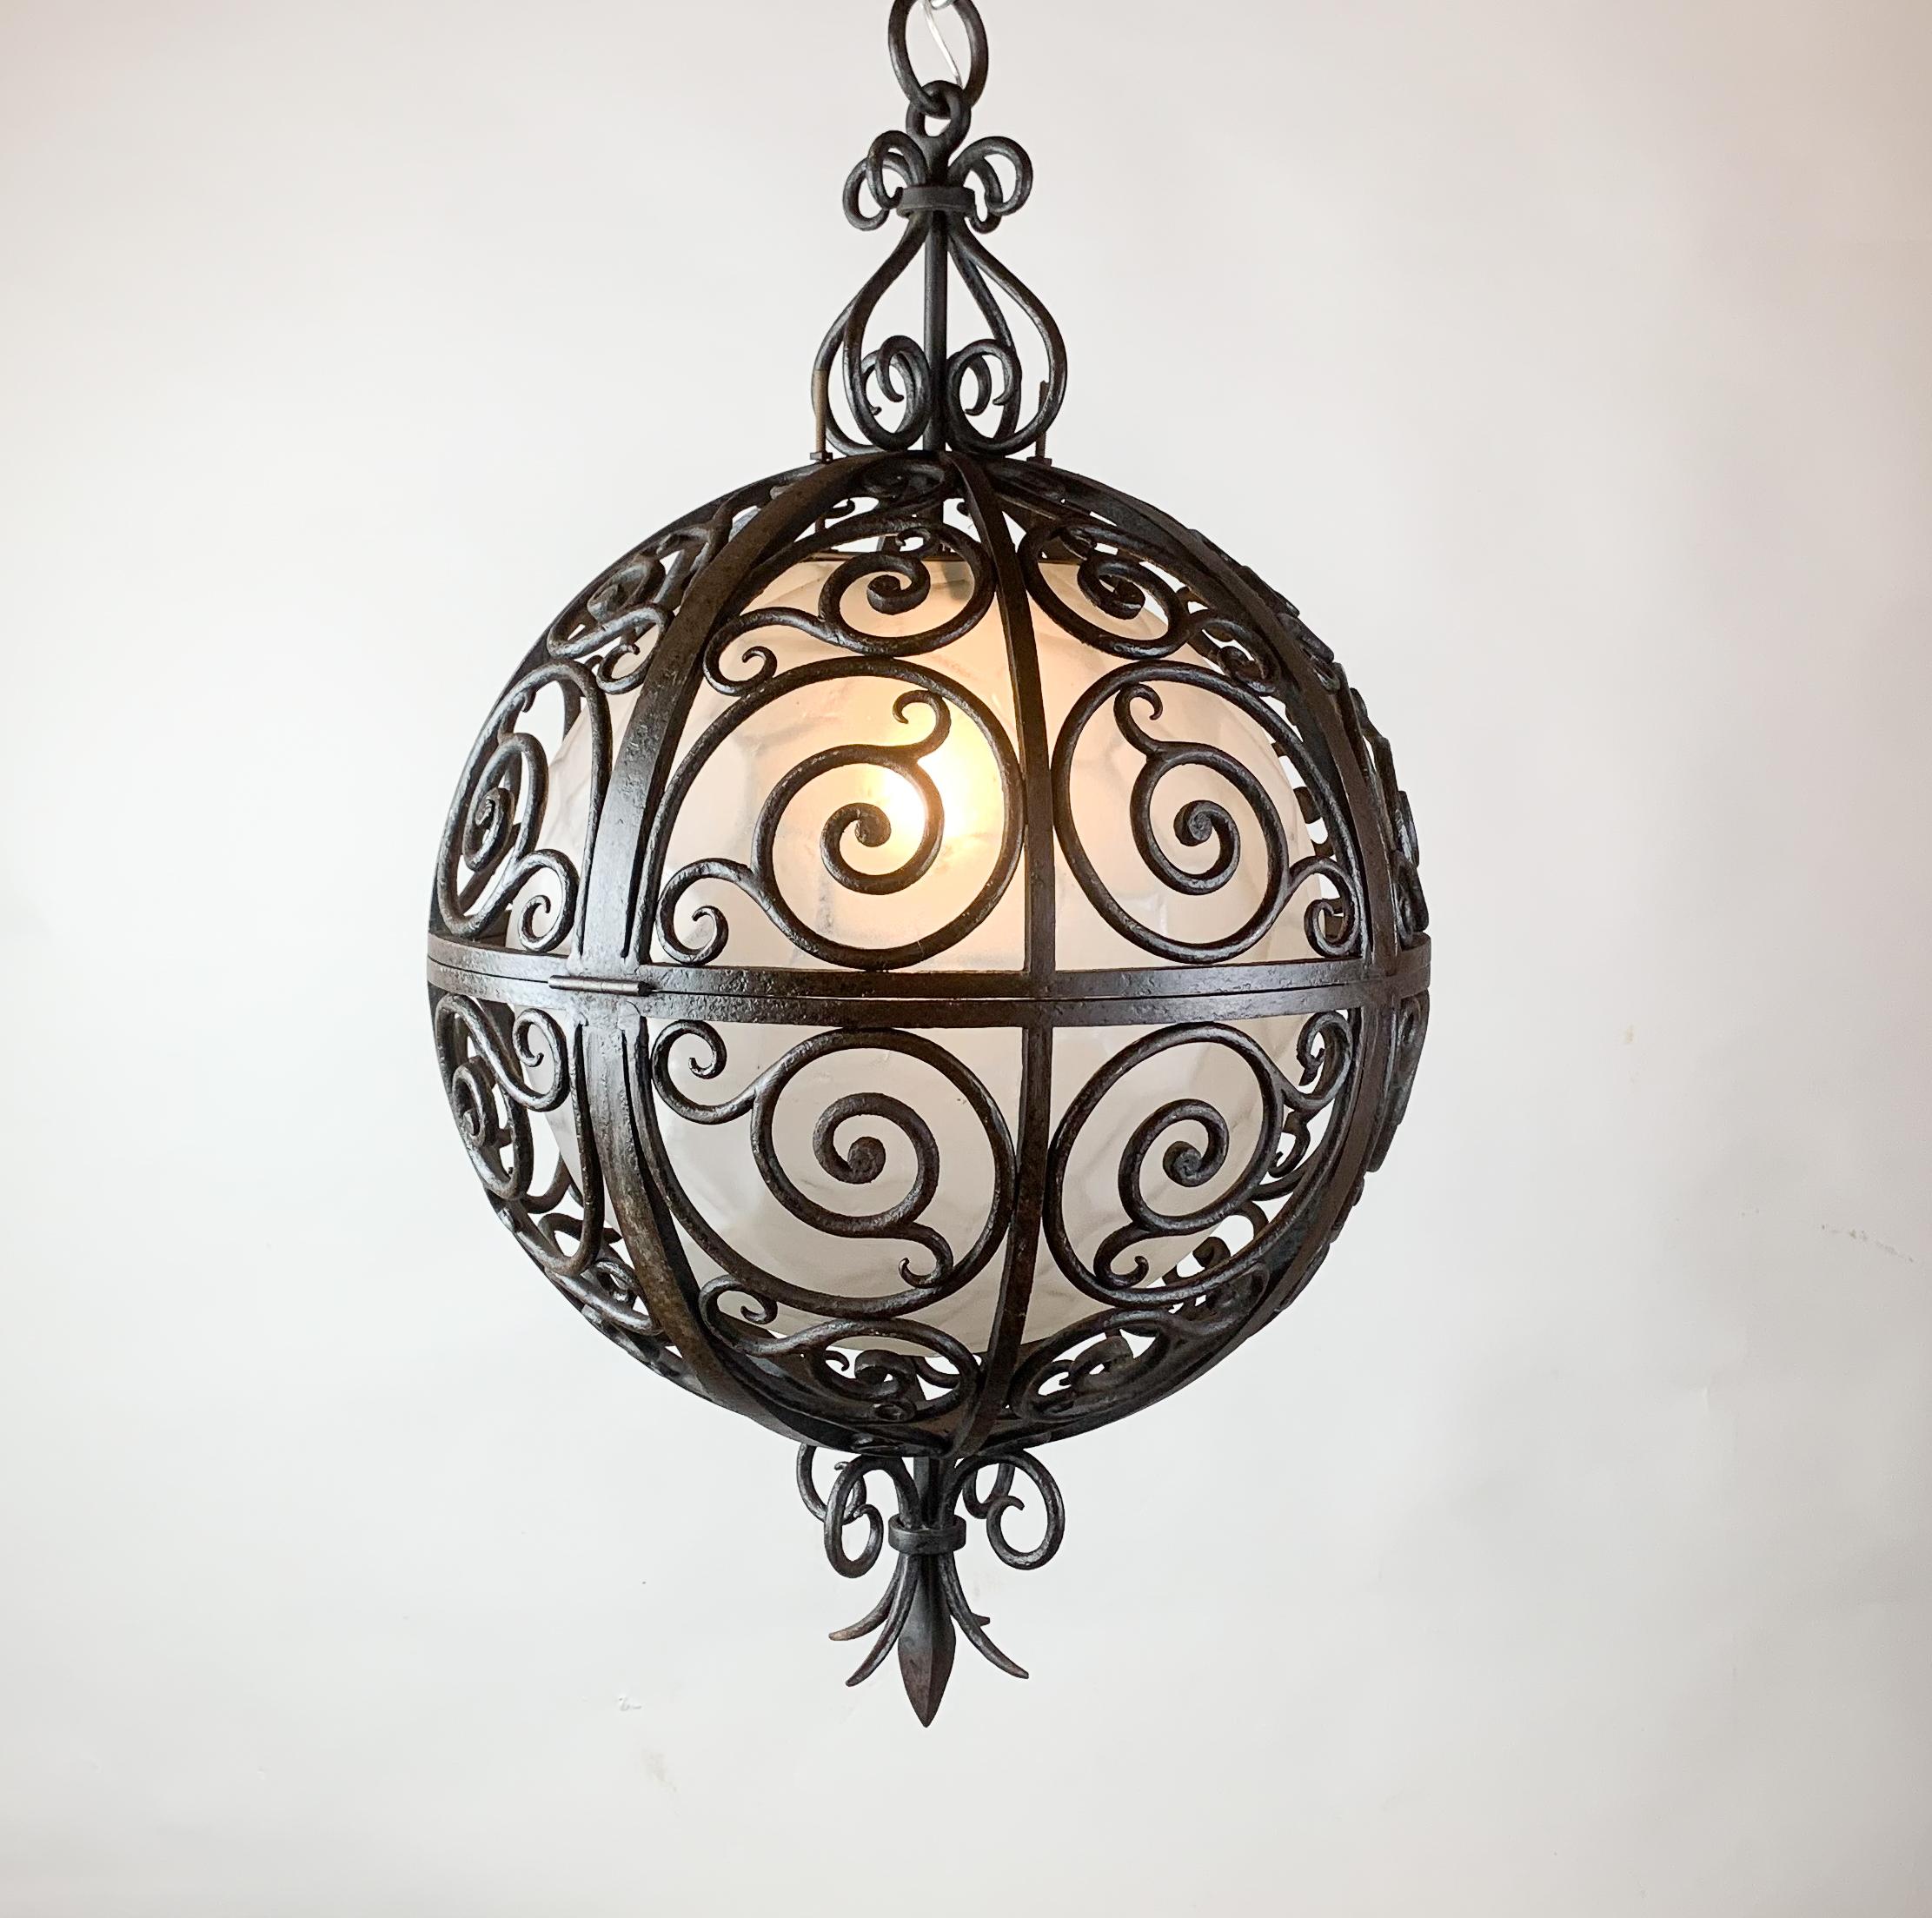 Wrought iron round suspension with interior glass sphere - c.1930.